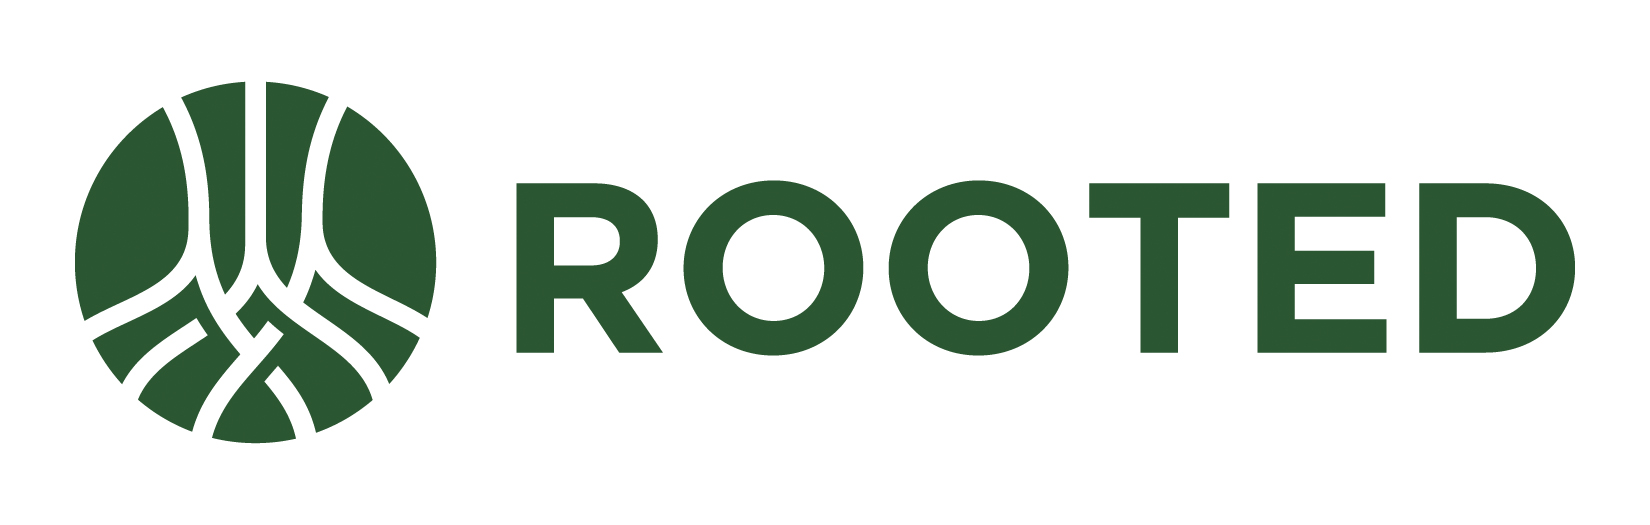 Rooted_Logo_Color.jpg